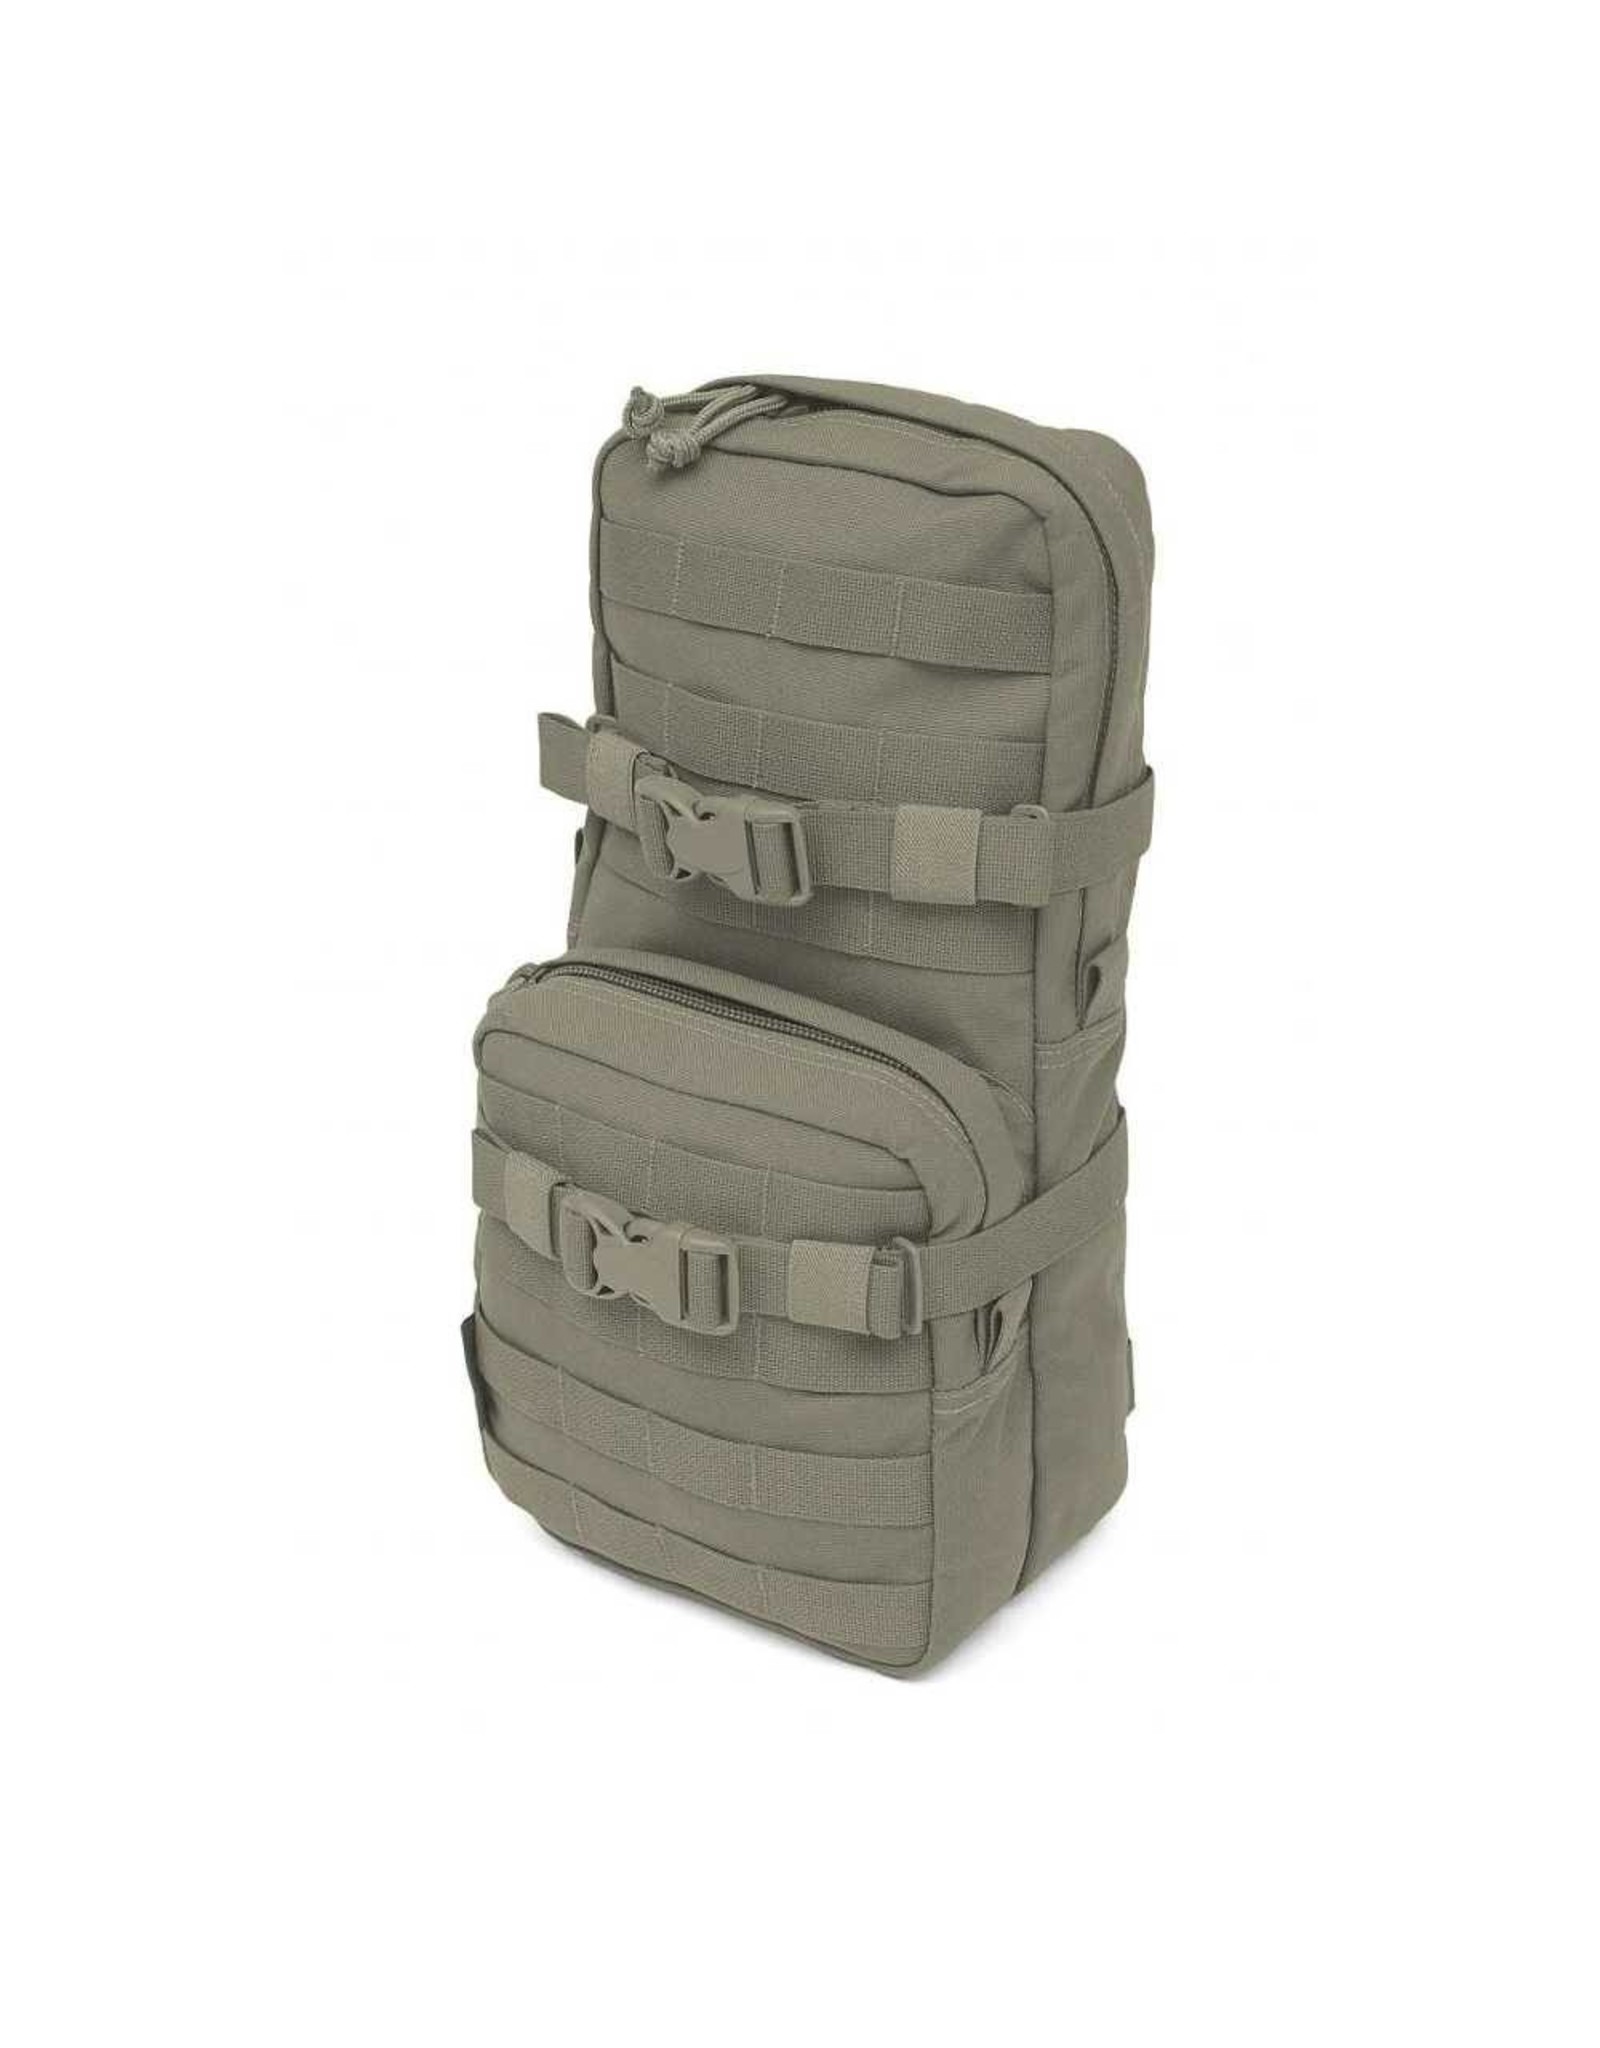 Warrior Cargo Pack with Hydration Compartment - Ranger Green